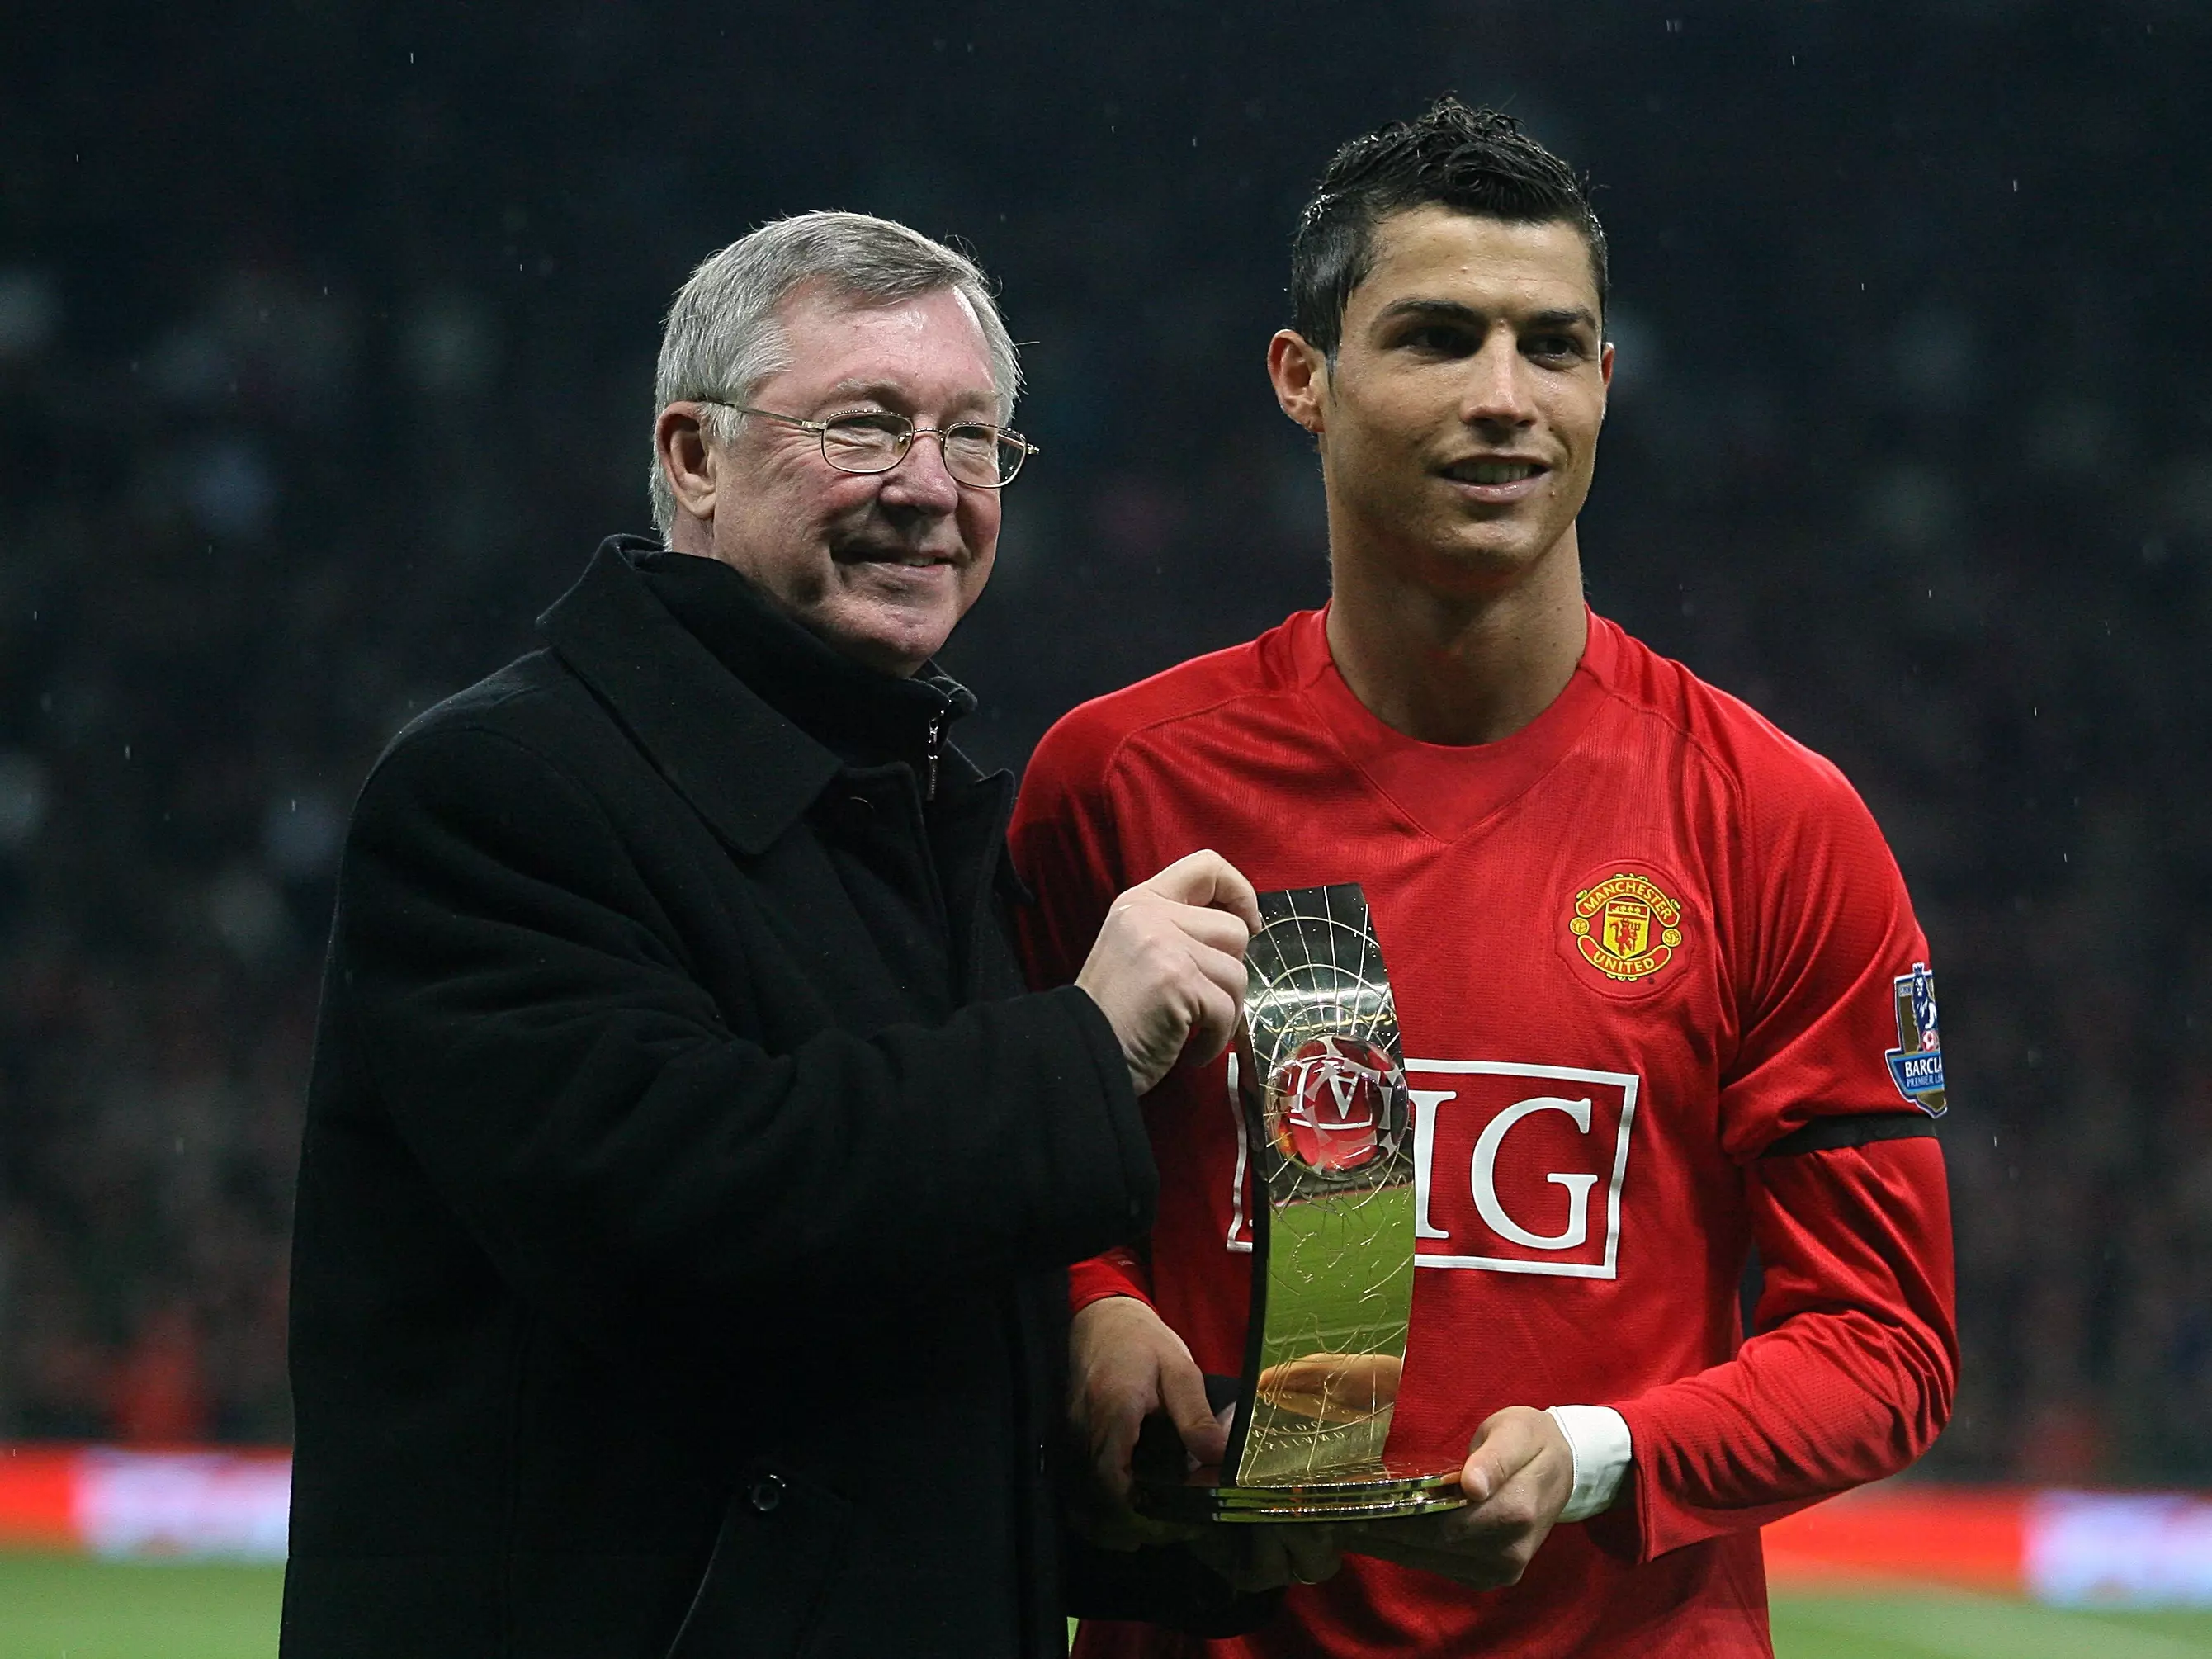 This Cristiano Ronaldo Interview On Sir Alex Ferguson Shows Just How Close The Pair Are